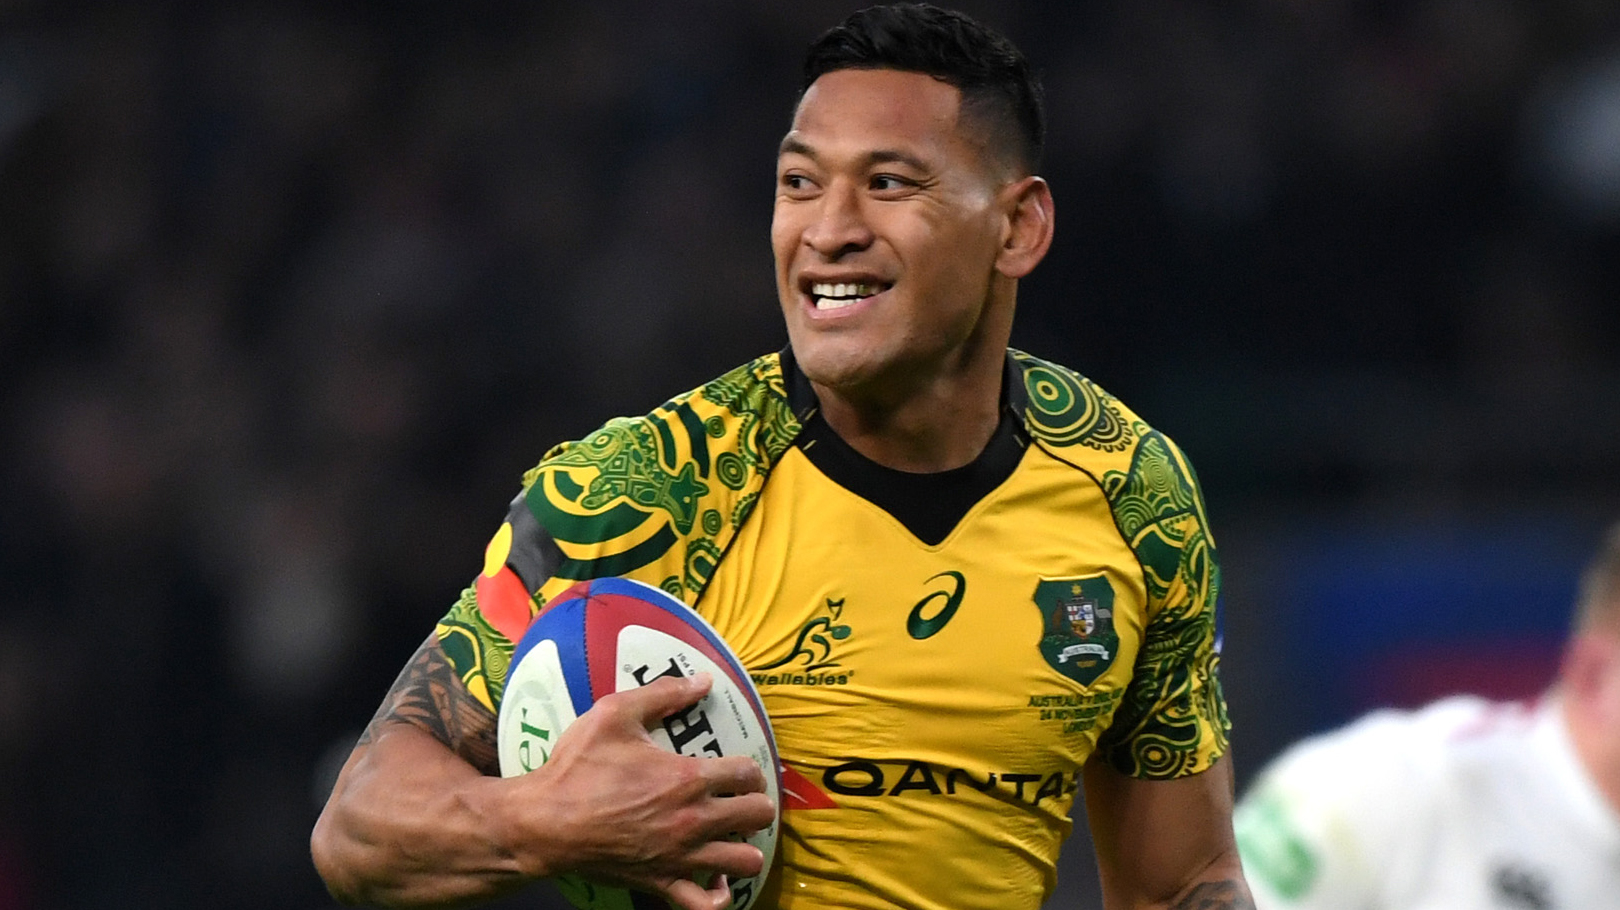 Rugby union star Israel Folau has secured a $403,000 profit in real estate deal.